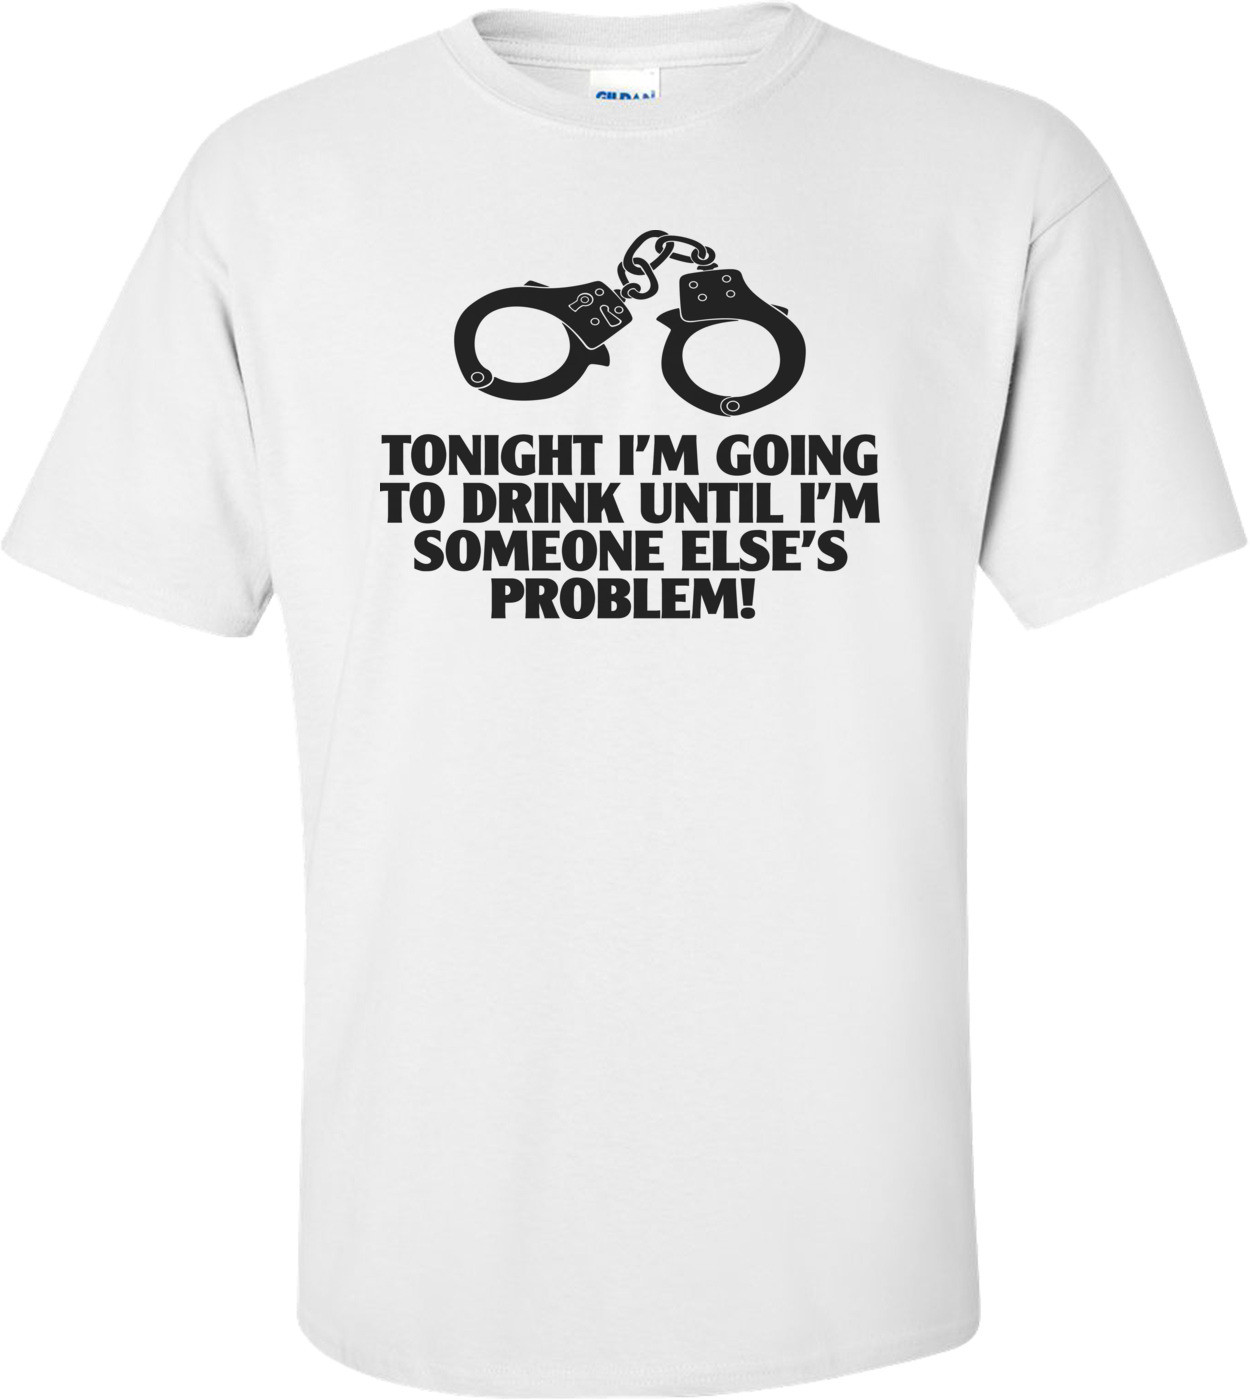 Tonight I'm Going To Drink Until I'm Someone Else's Problem Funny Drinking Shirt